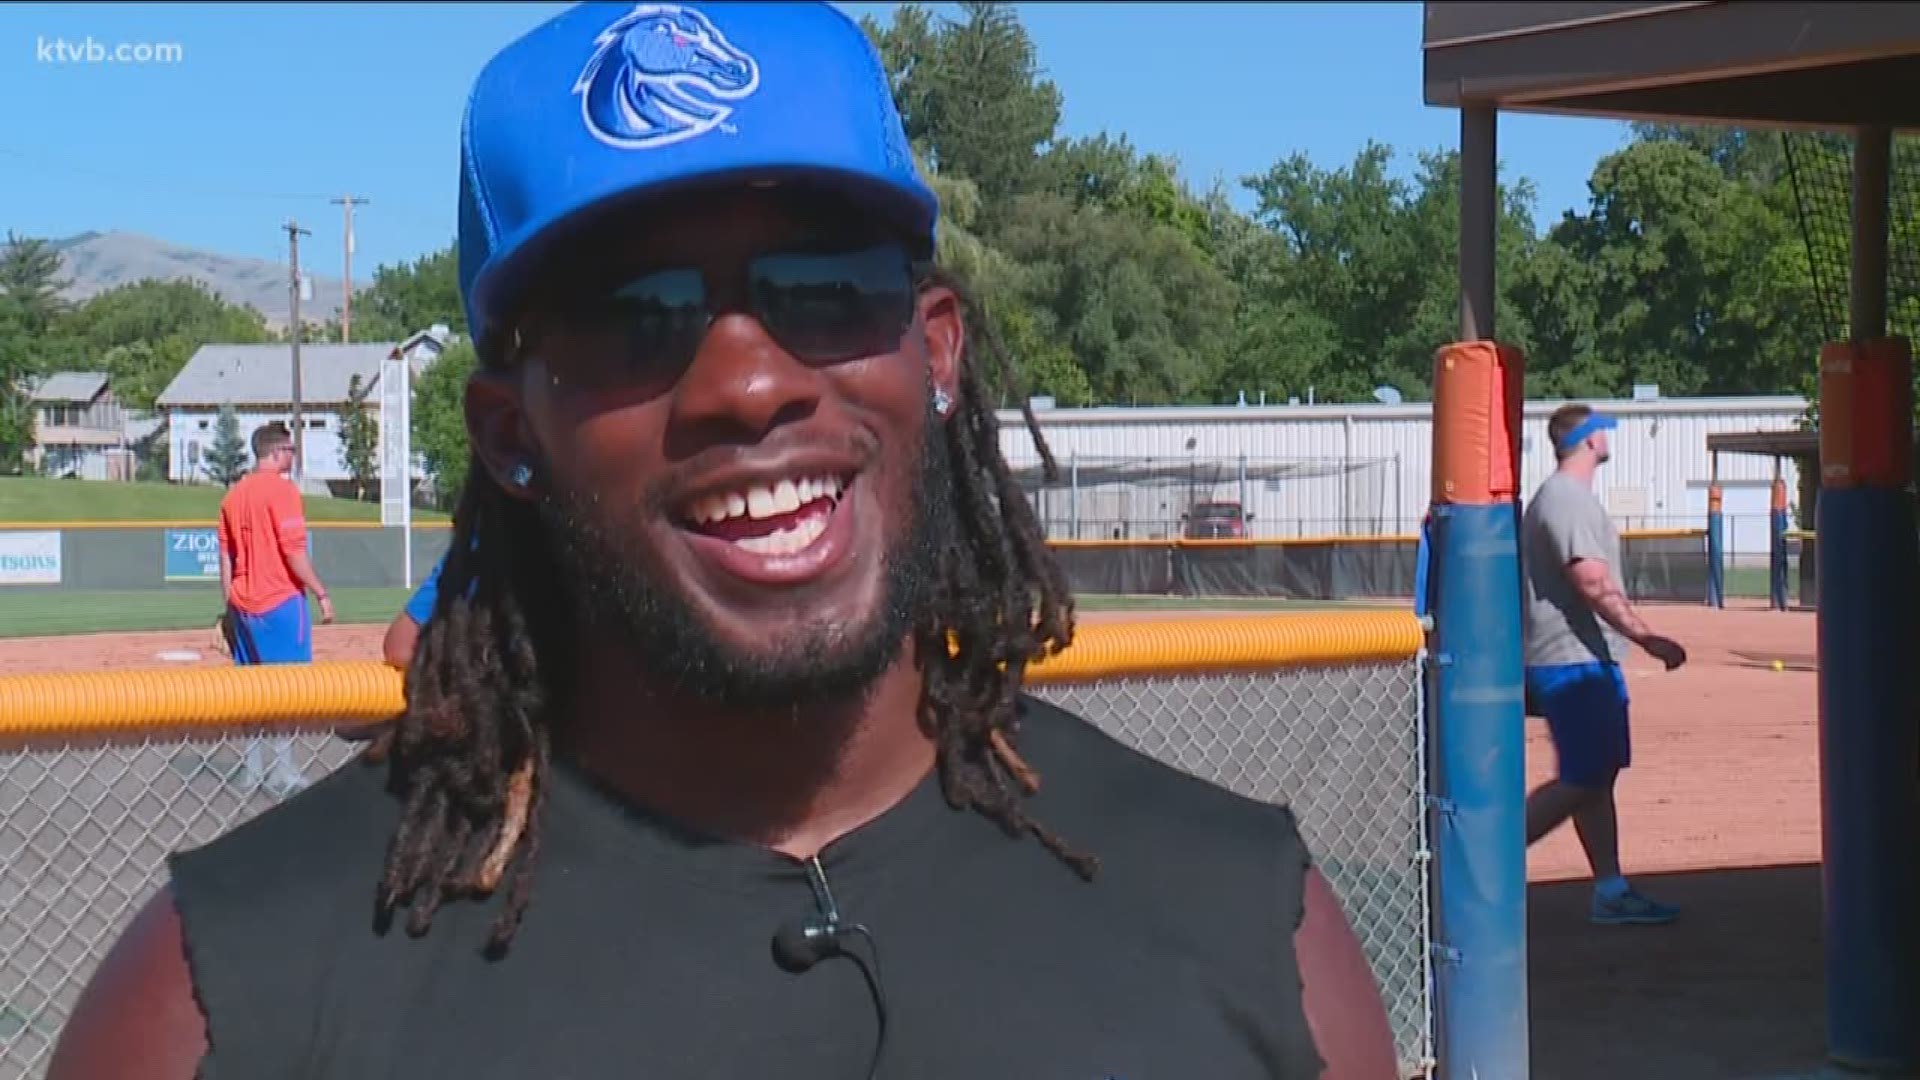 Several Boise State football players are preparing for the annual Summer Softball Classic